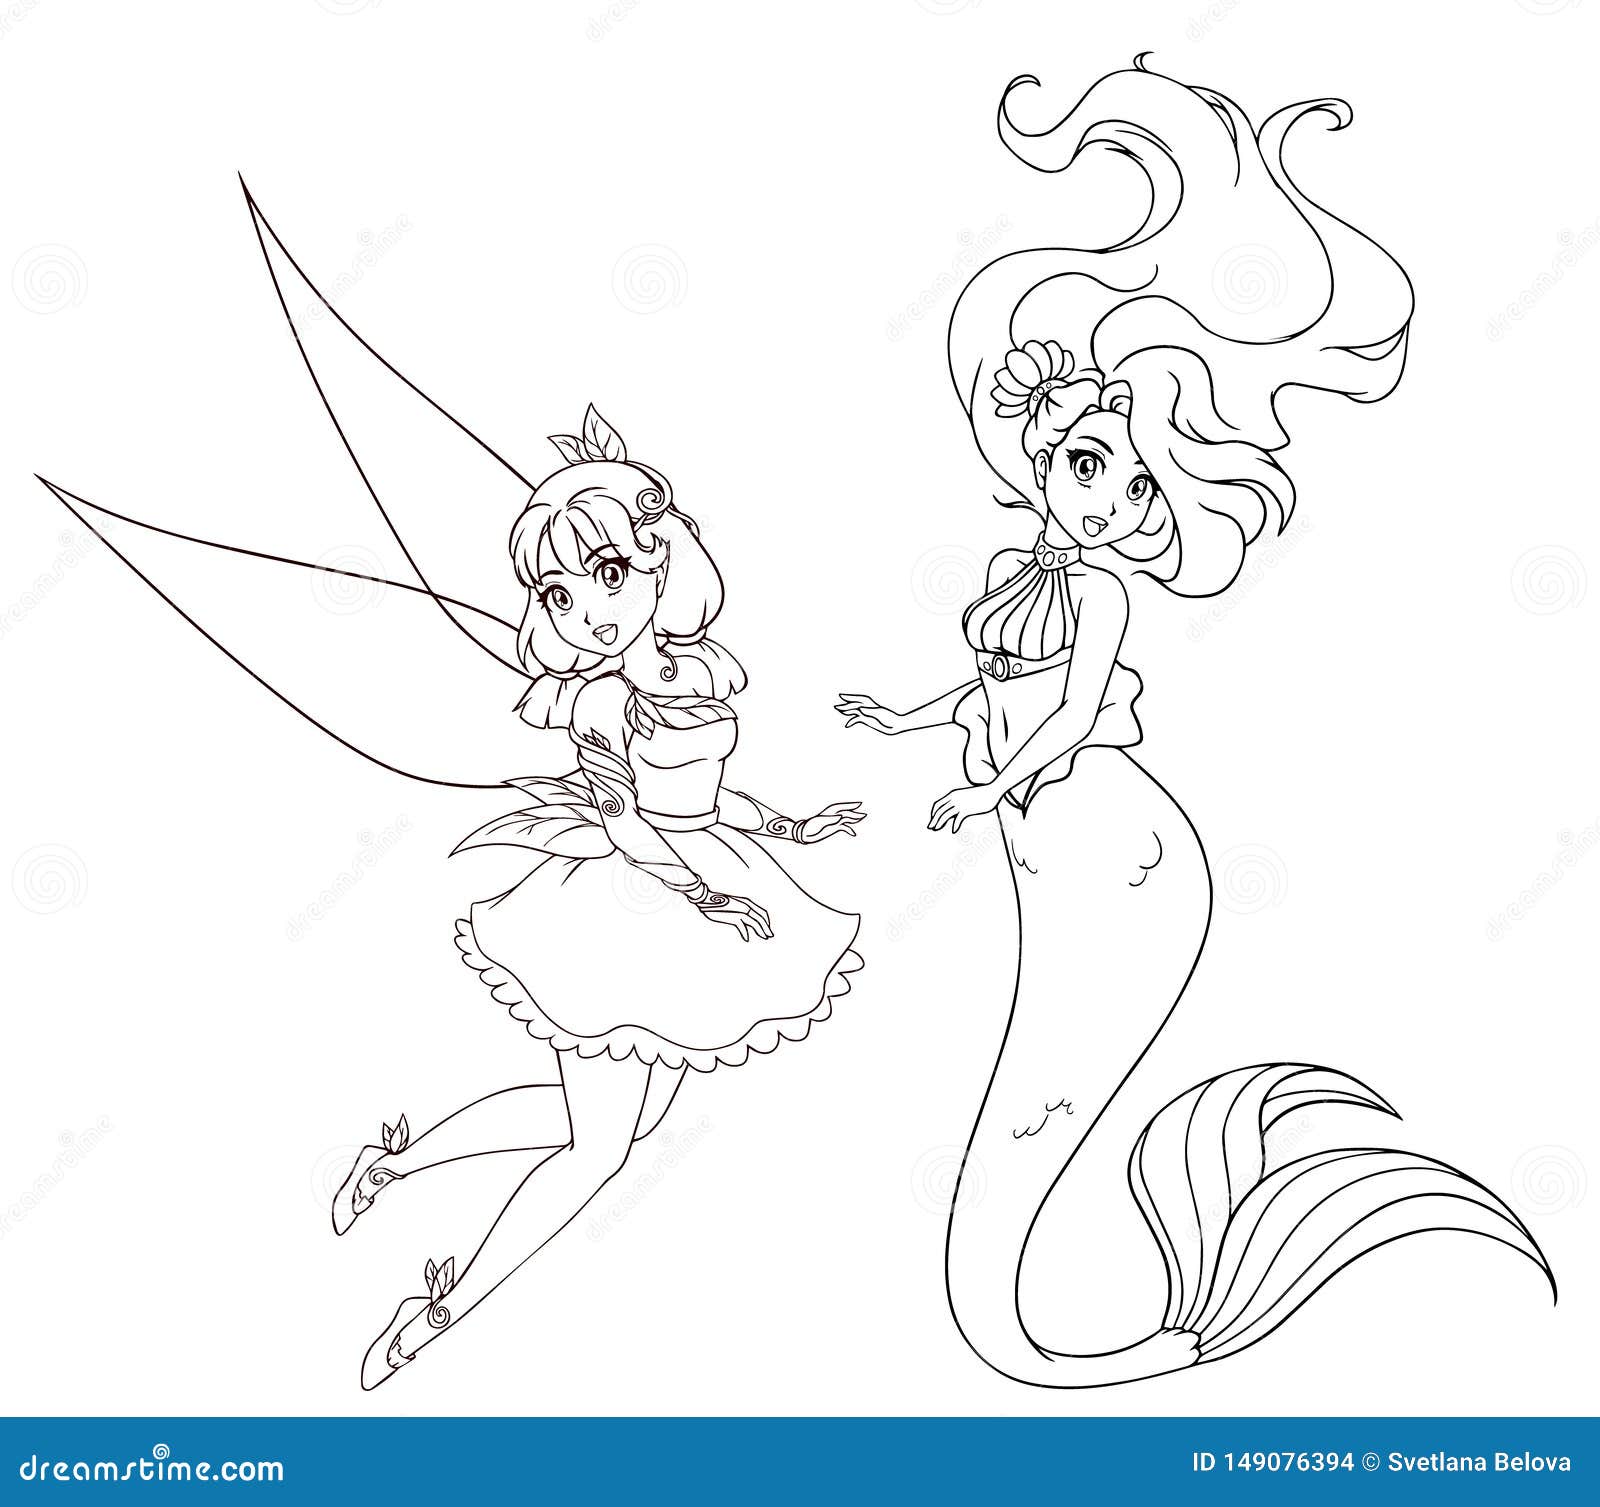 Set of Two Anime Style Characters. Mermaid and Fairy. Hand Drawn ...